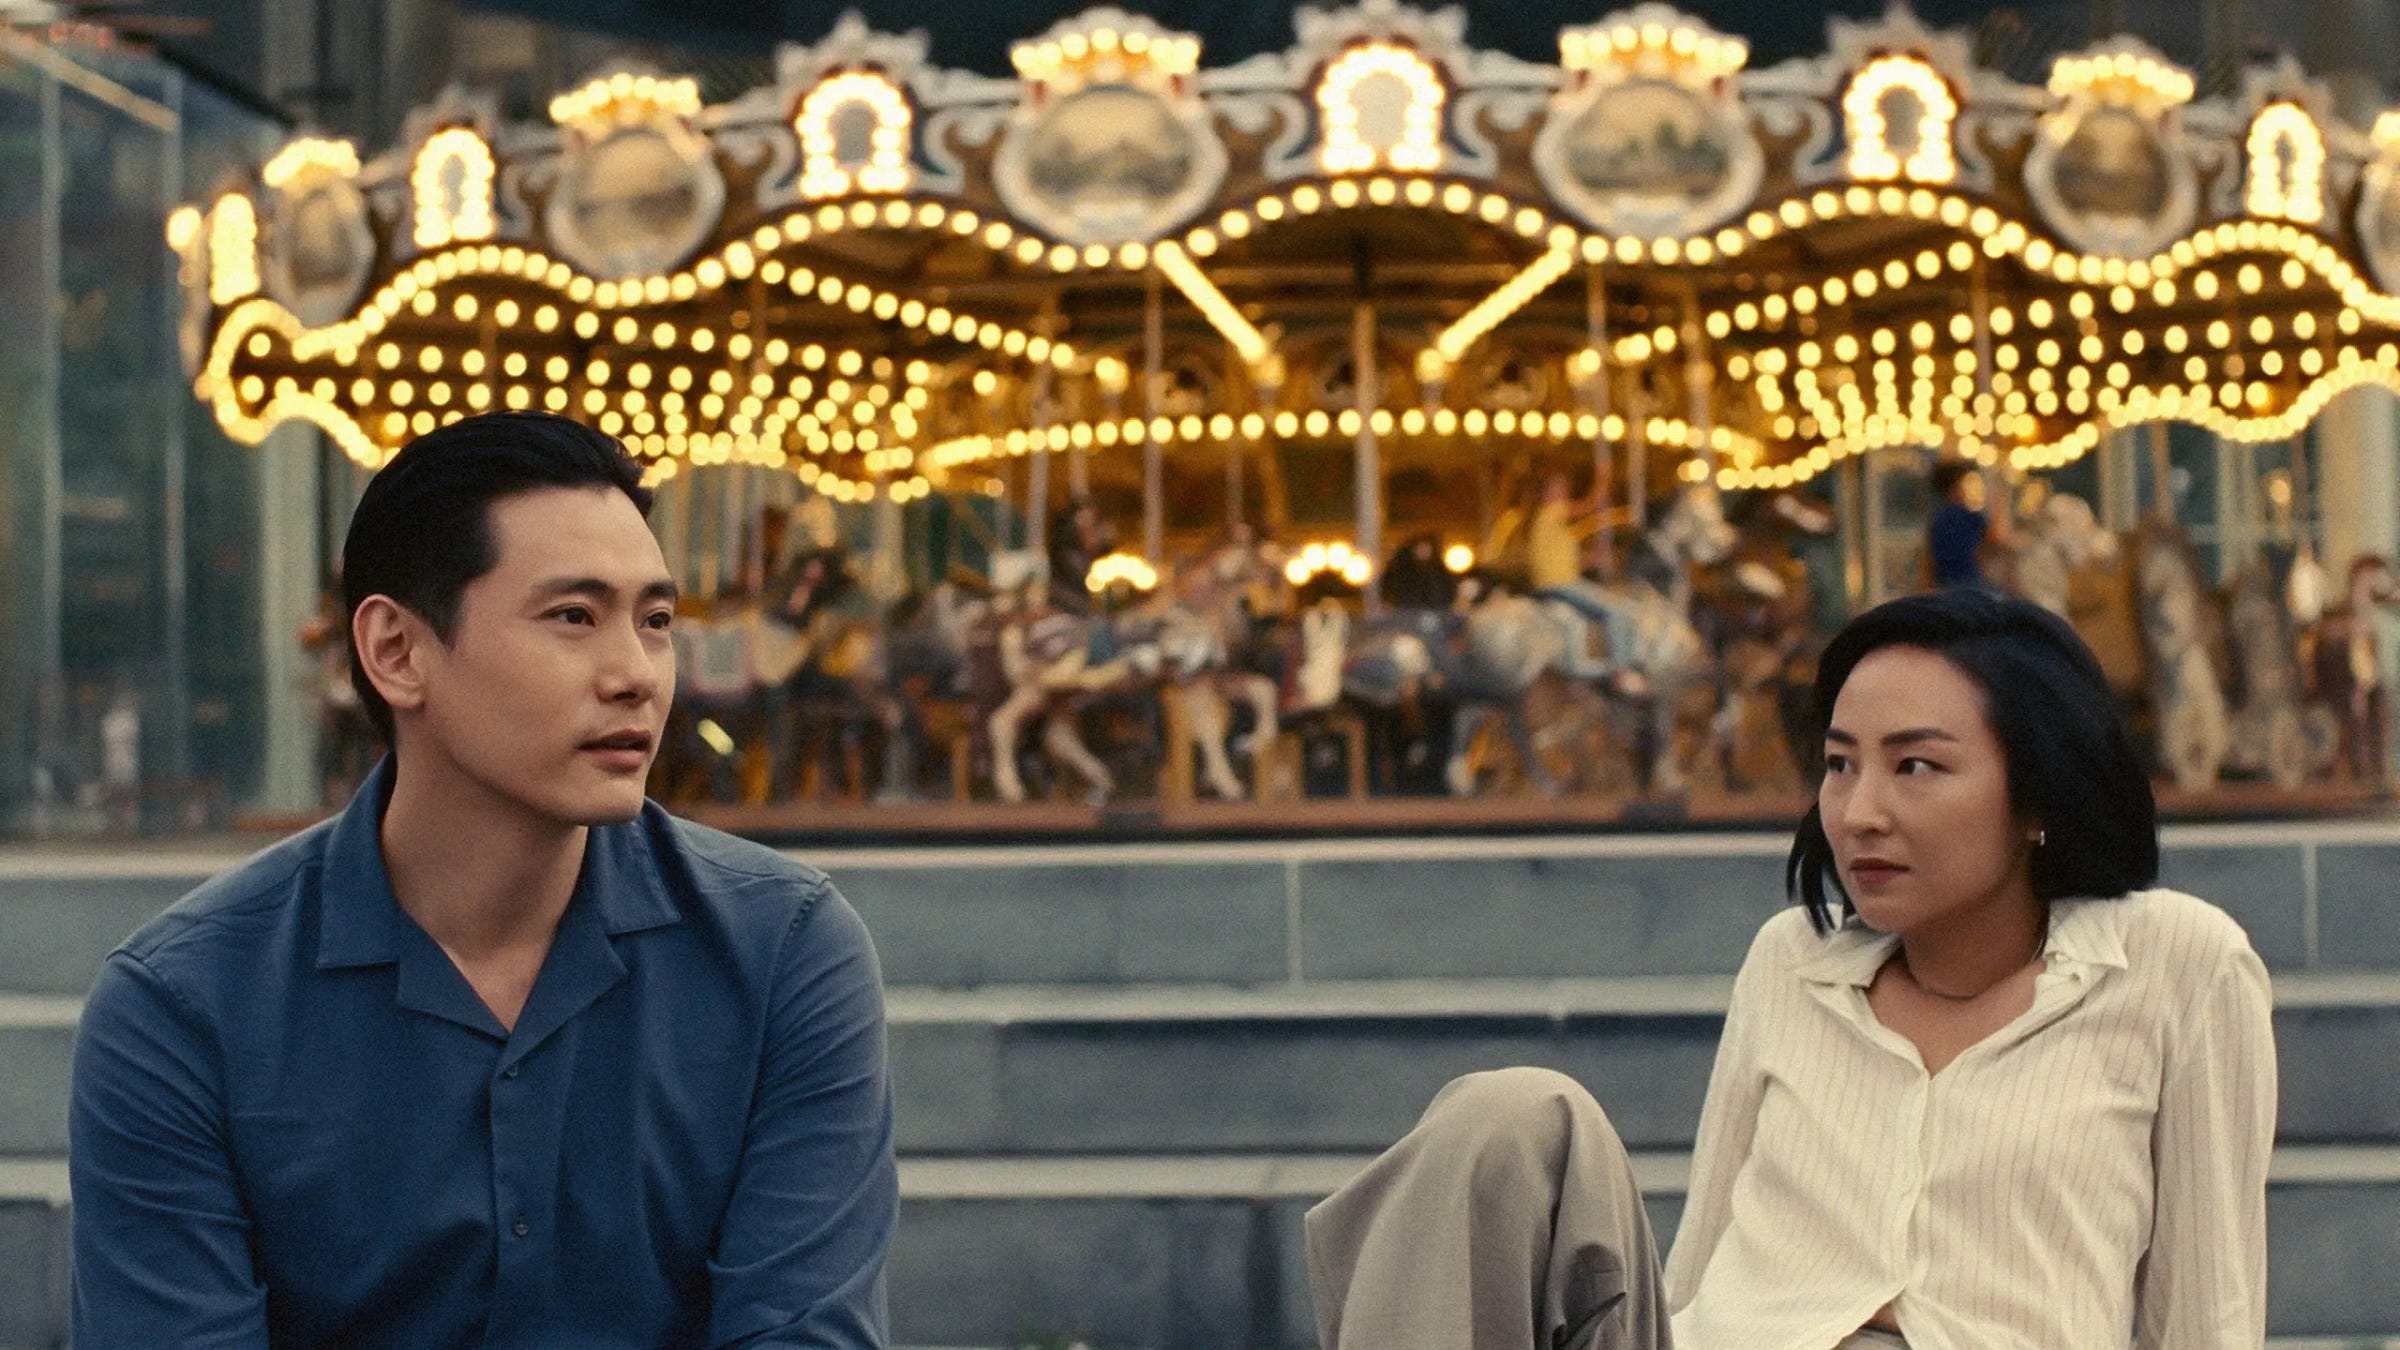 A man and woman sitting in front of a carousel. He is looking off in the distance and she is leaning back and looking at him.